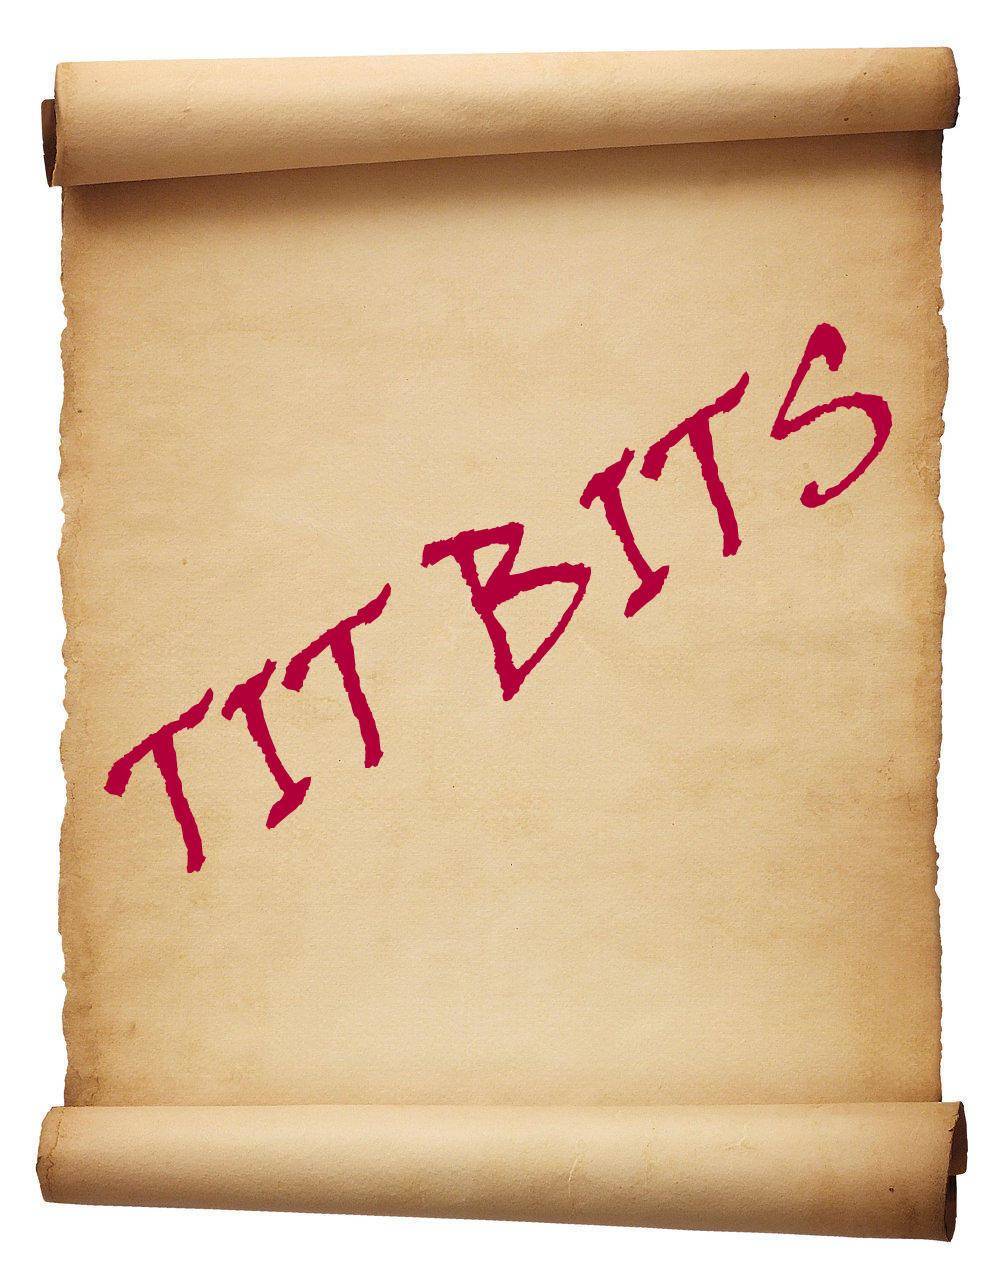 Tit bits from around the country